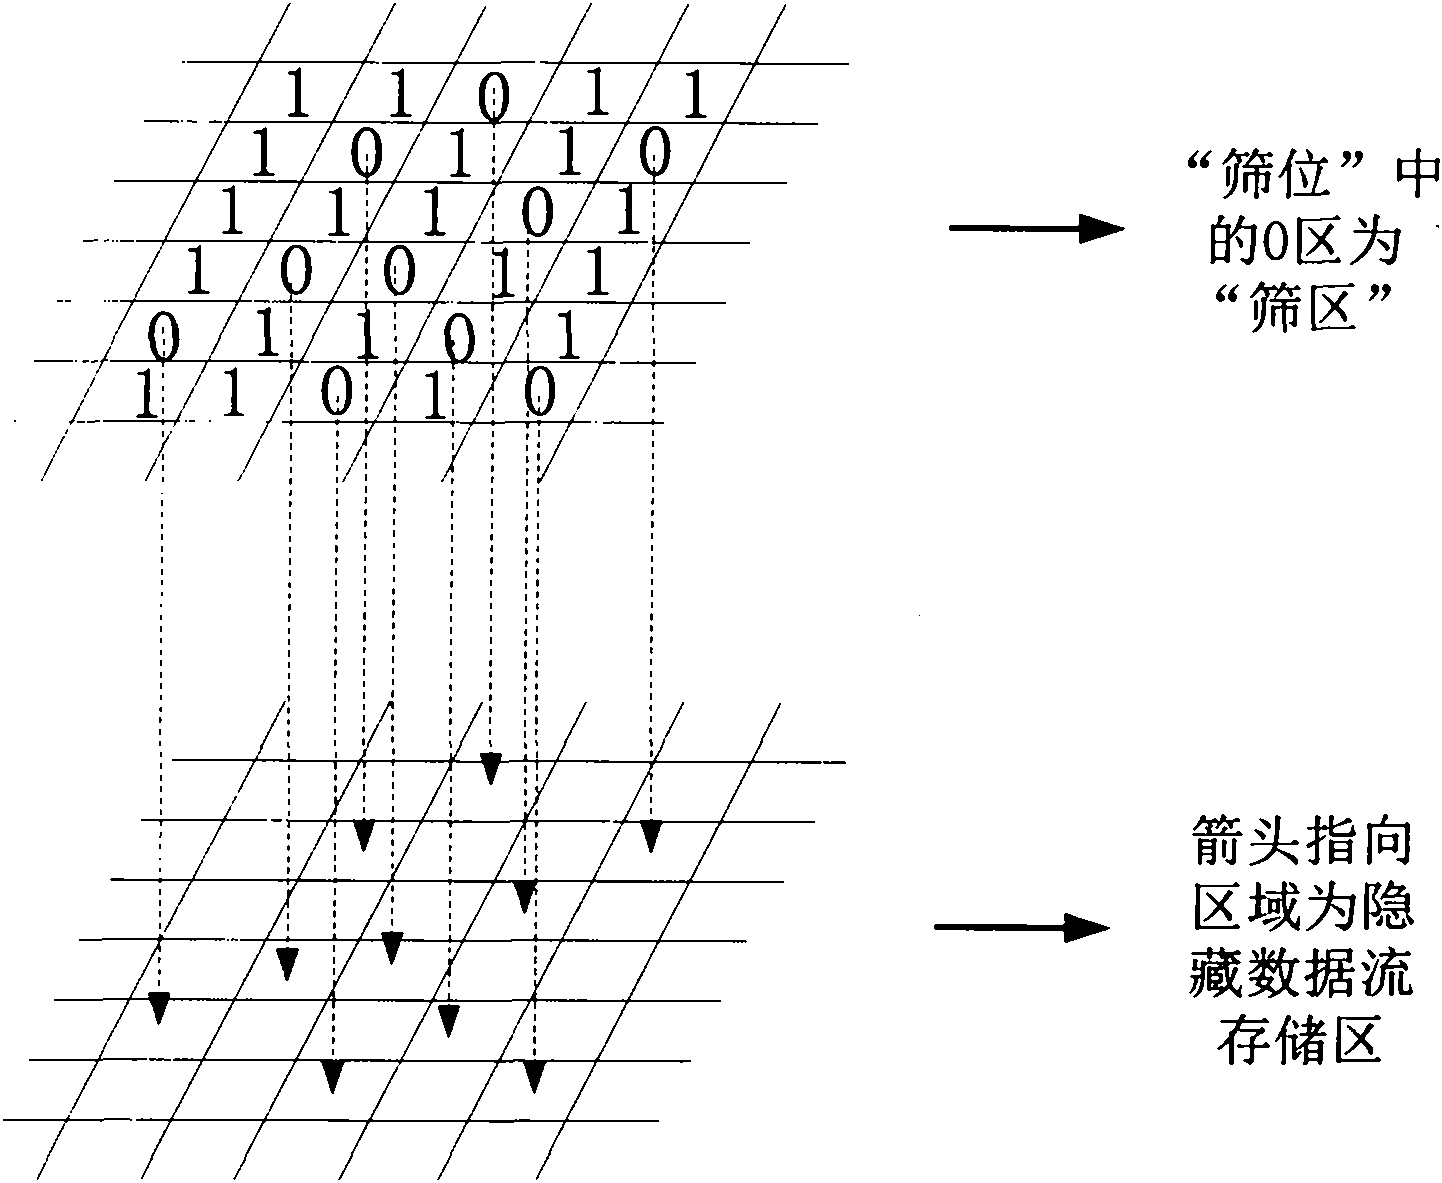 Method for hiding mass information by using remote sensing image